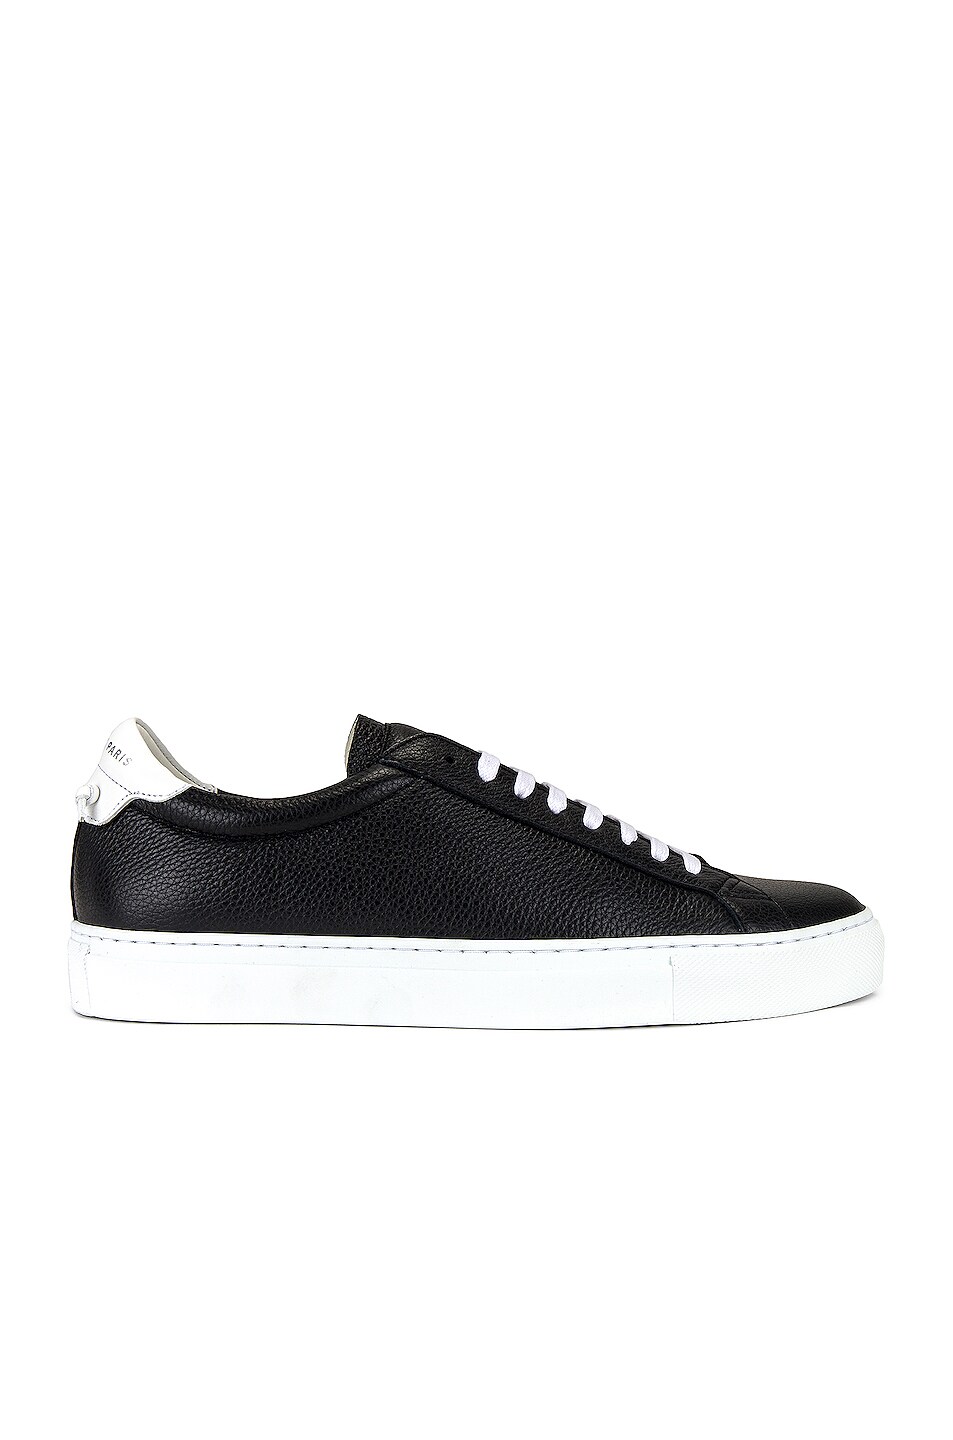 Image 1 of Givenchy Urban Street Sneaker in Black & White